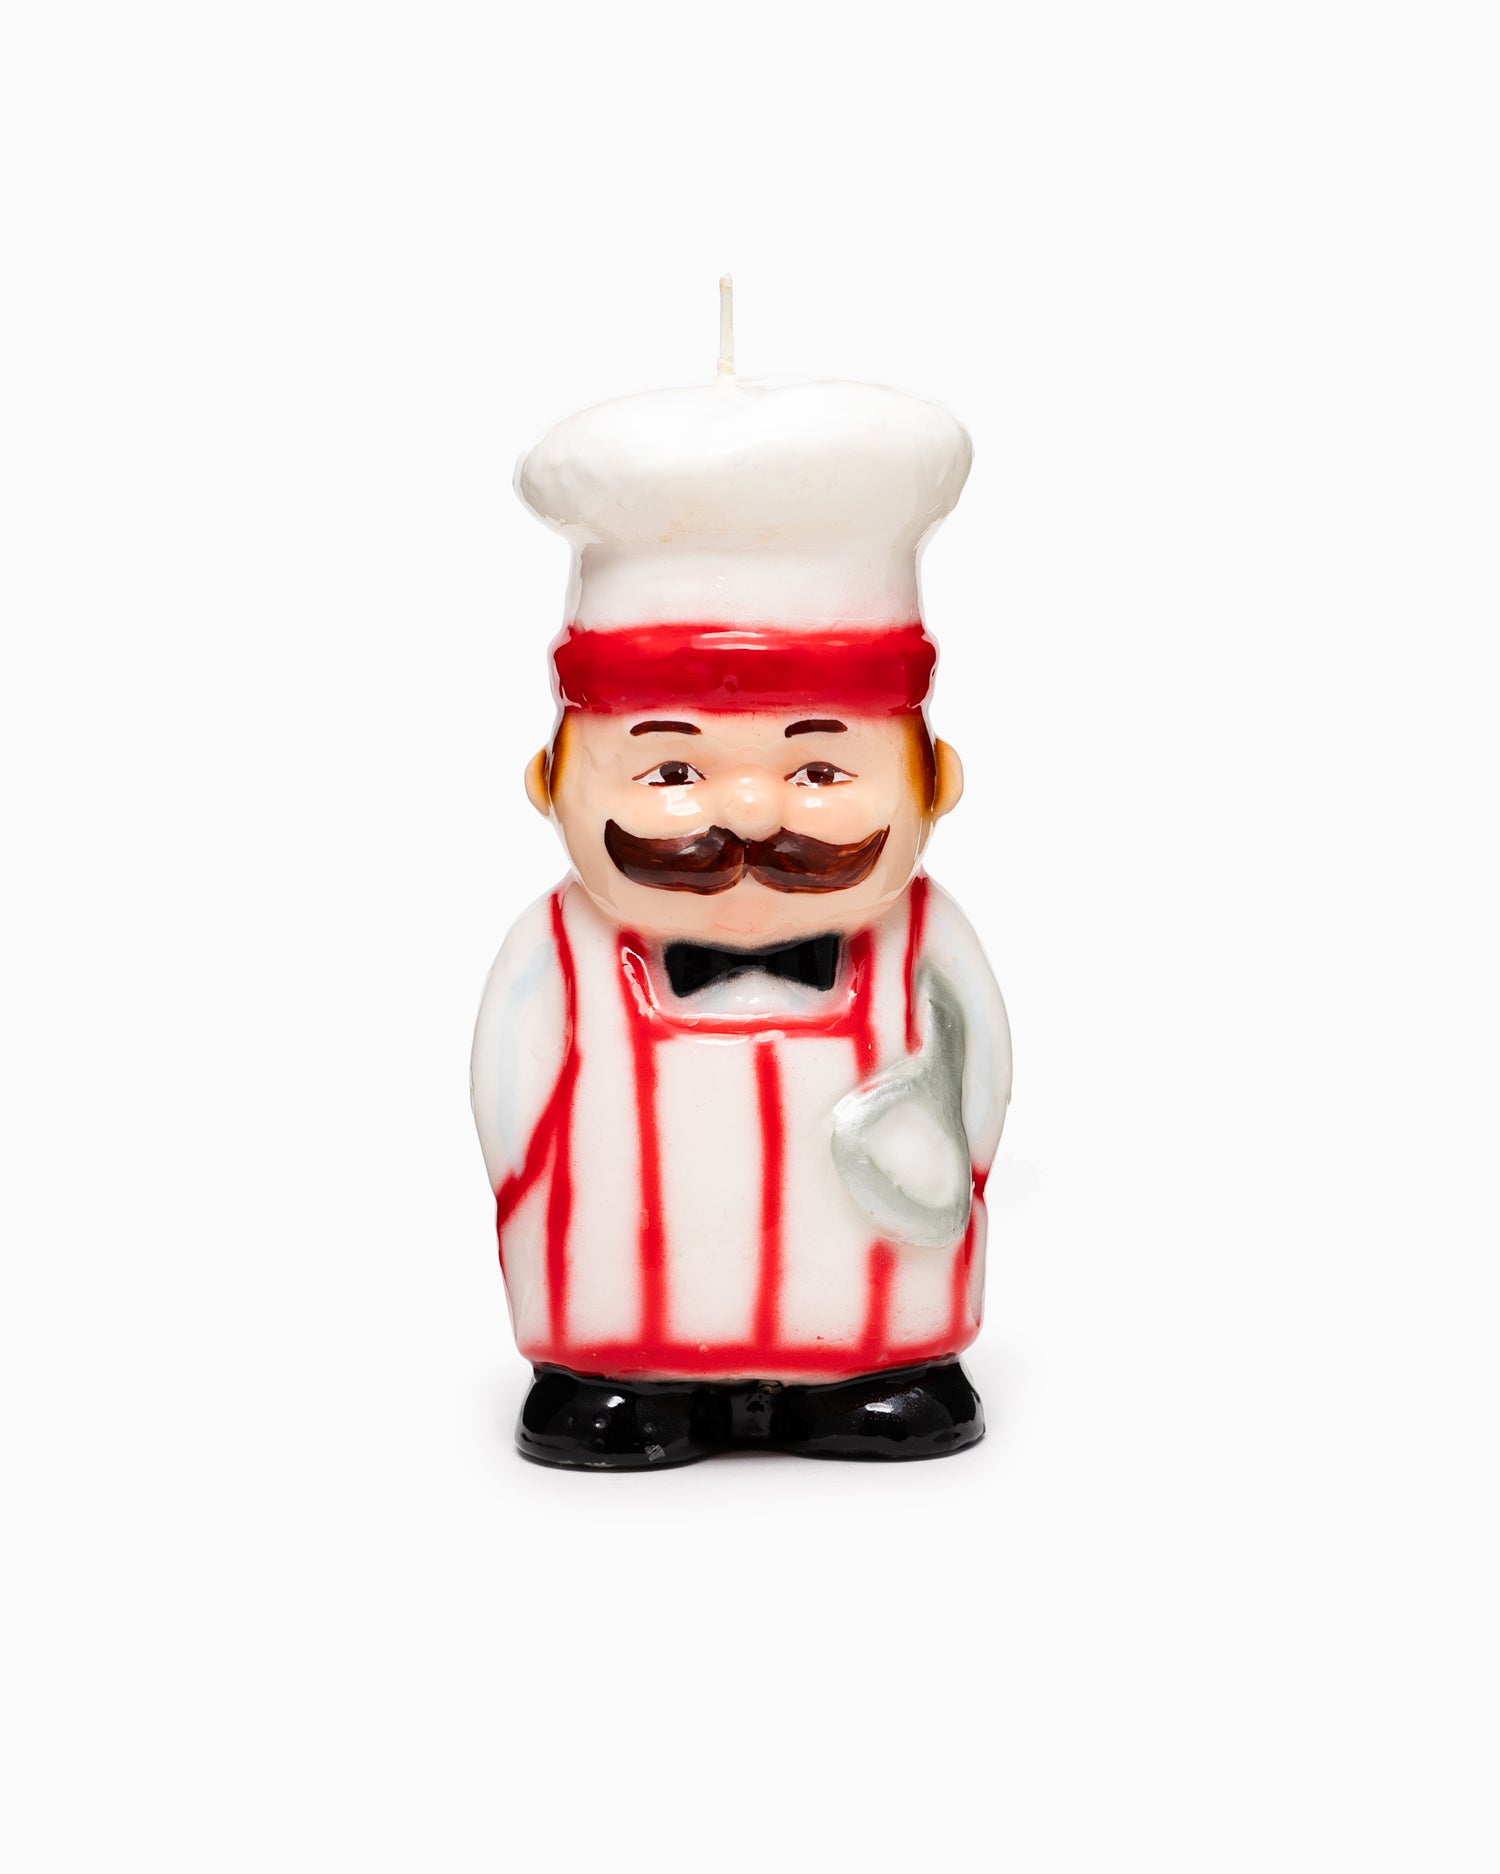 Chef Candle